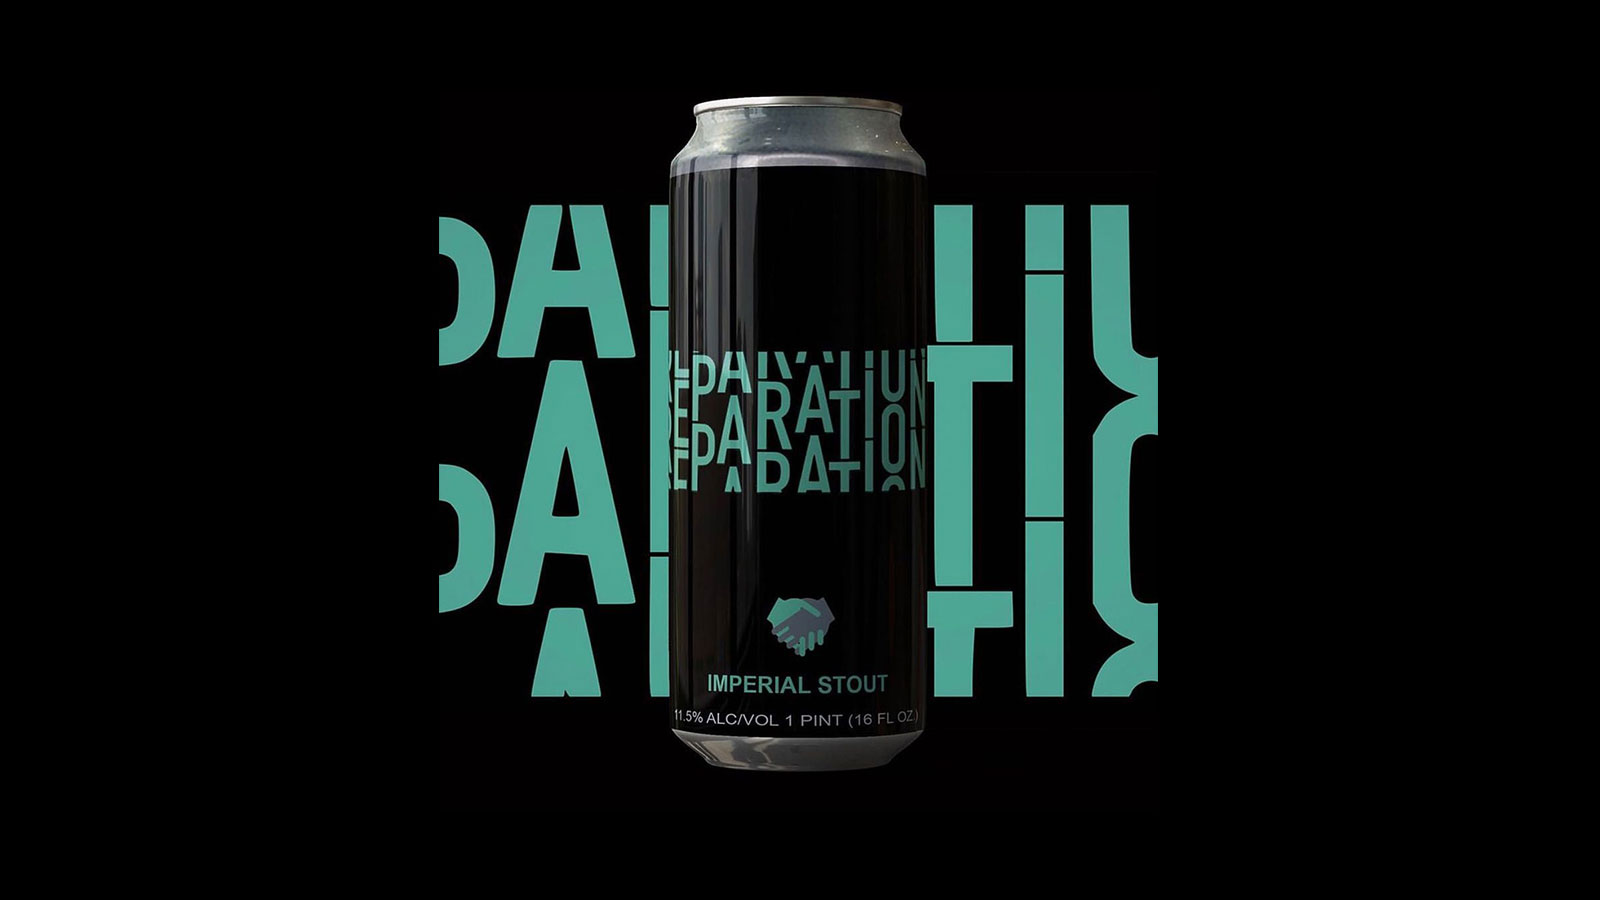 Great Notion’s Reparations Beer. Educating Its Clientele to Support Reparations and HR-40.